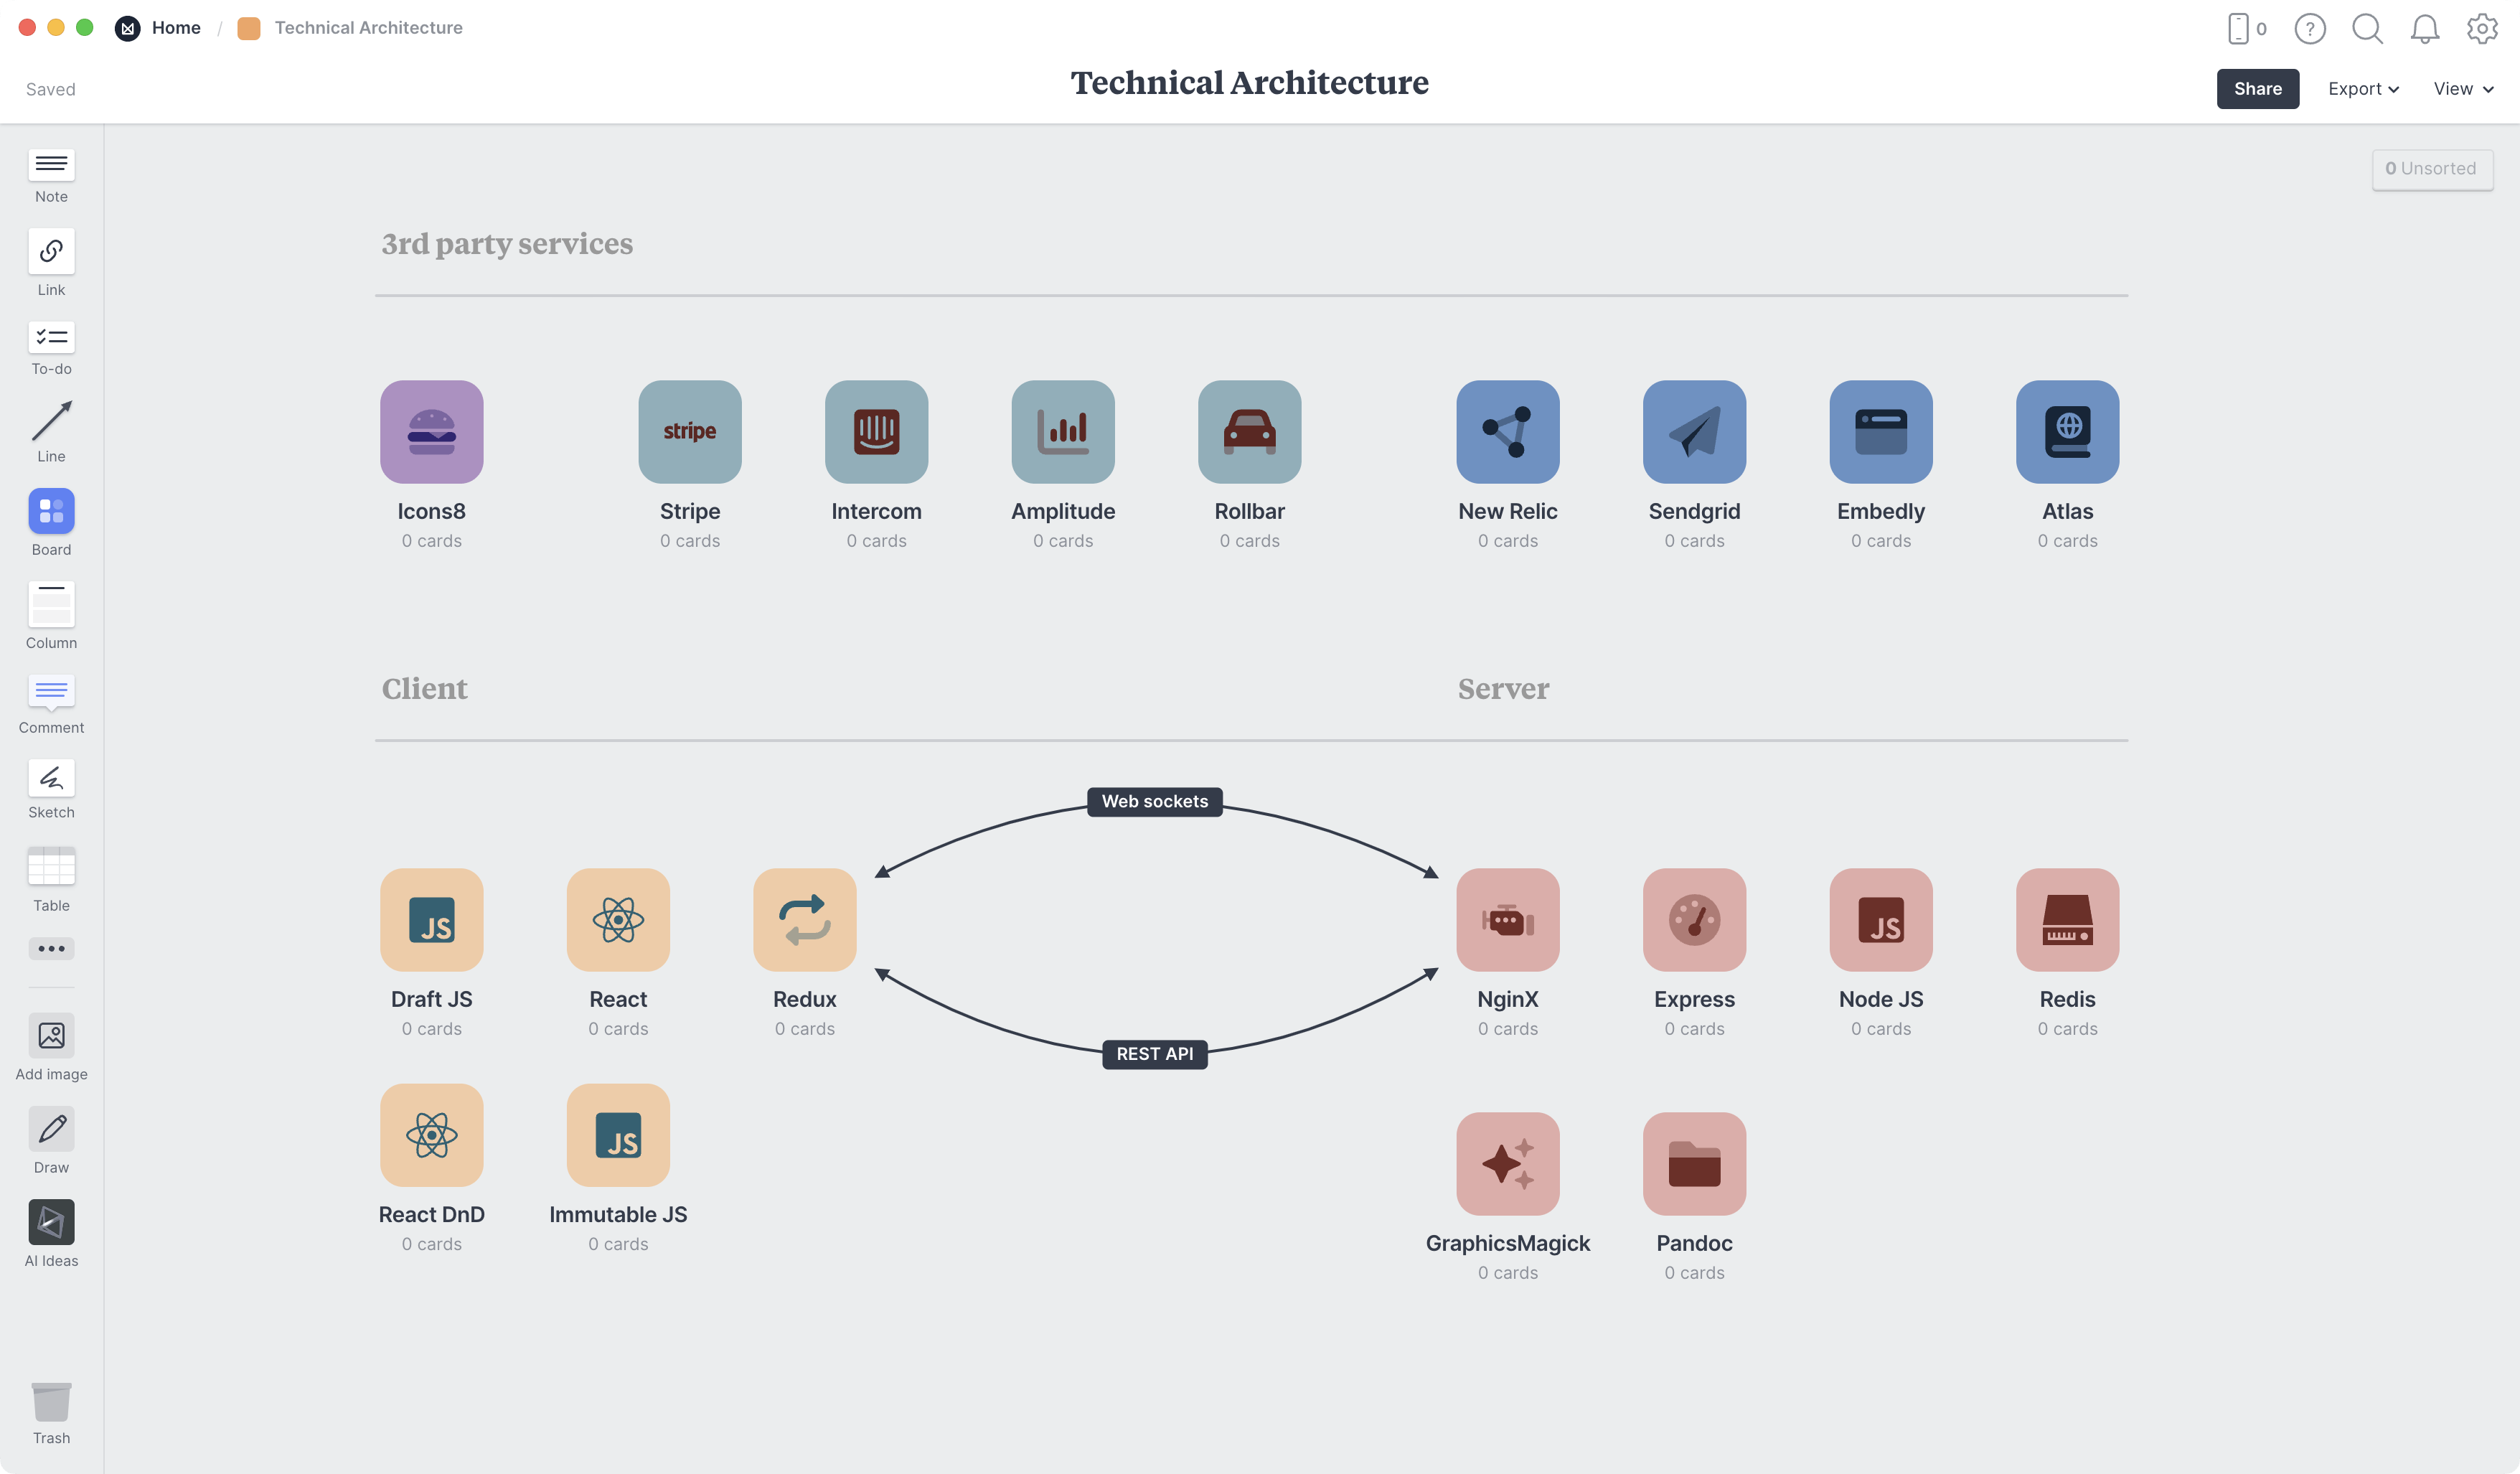 Technical Architecture Template, within the Milanote app